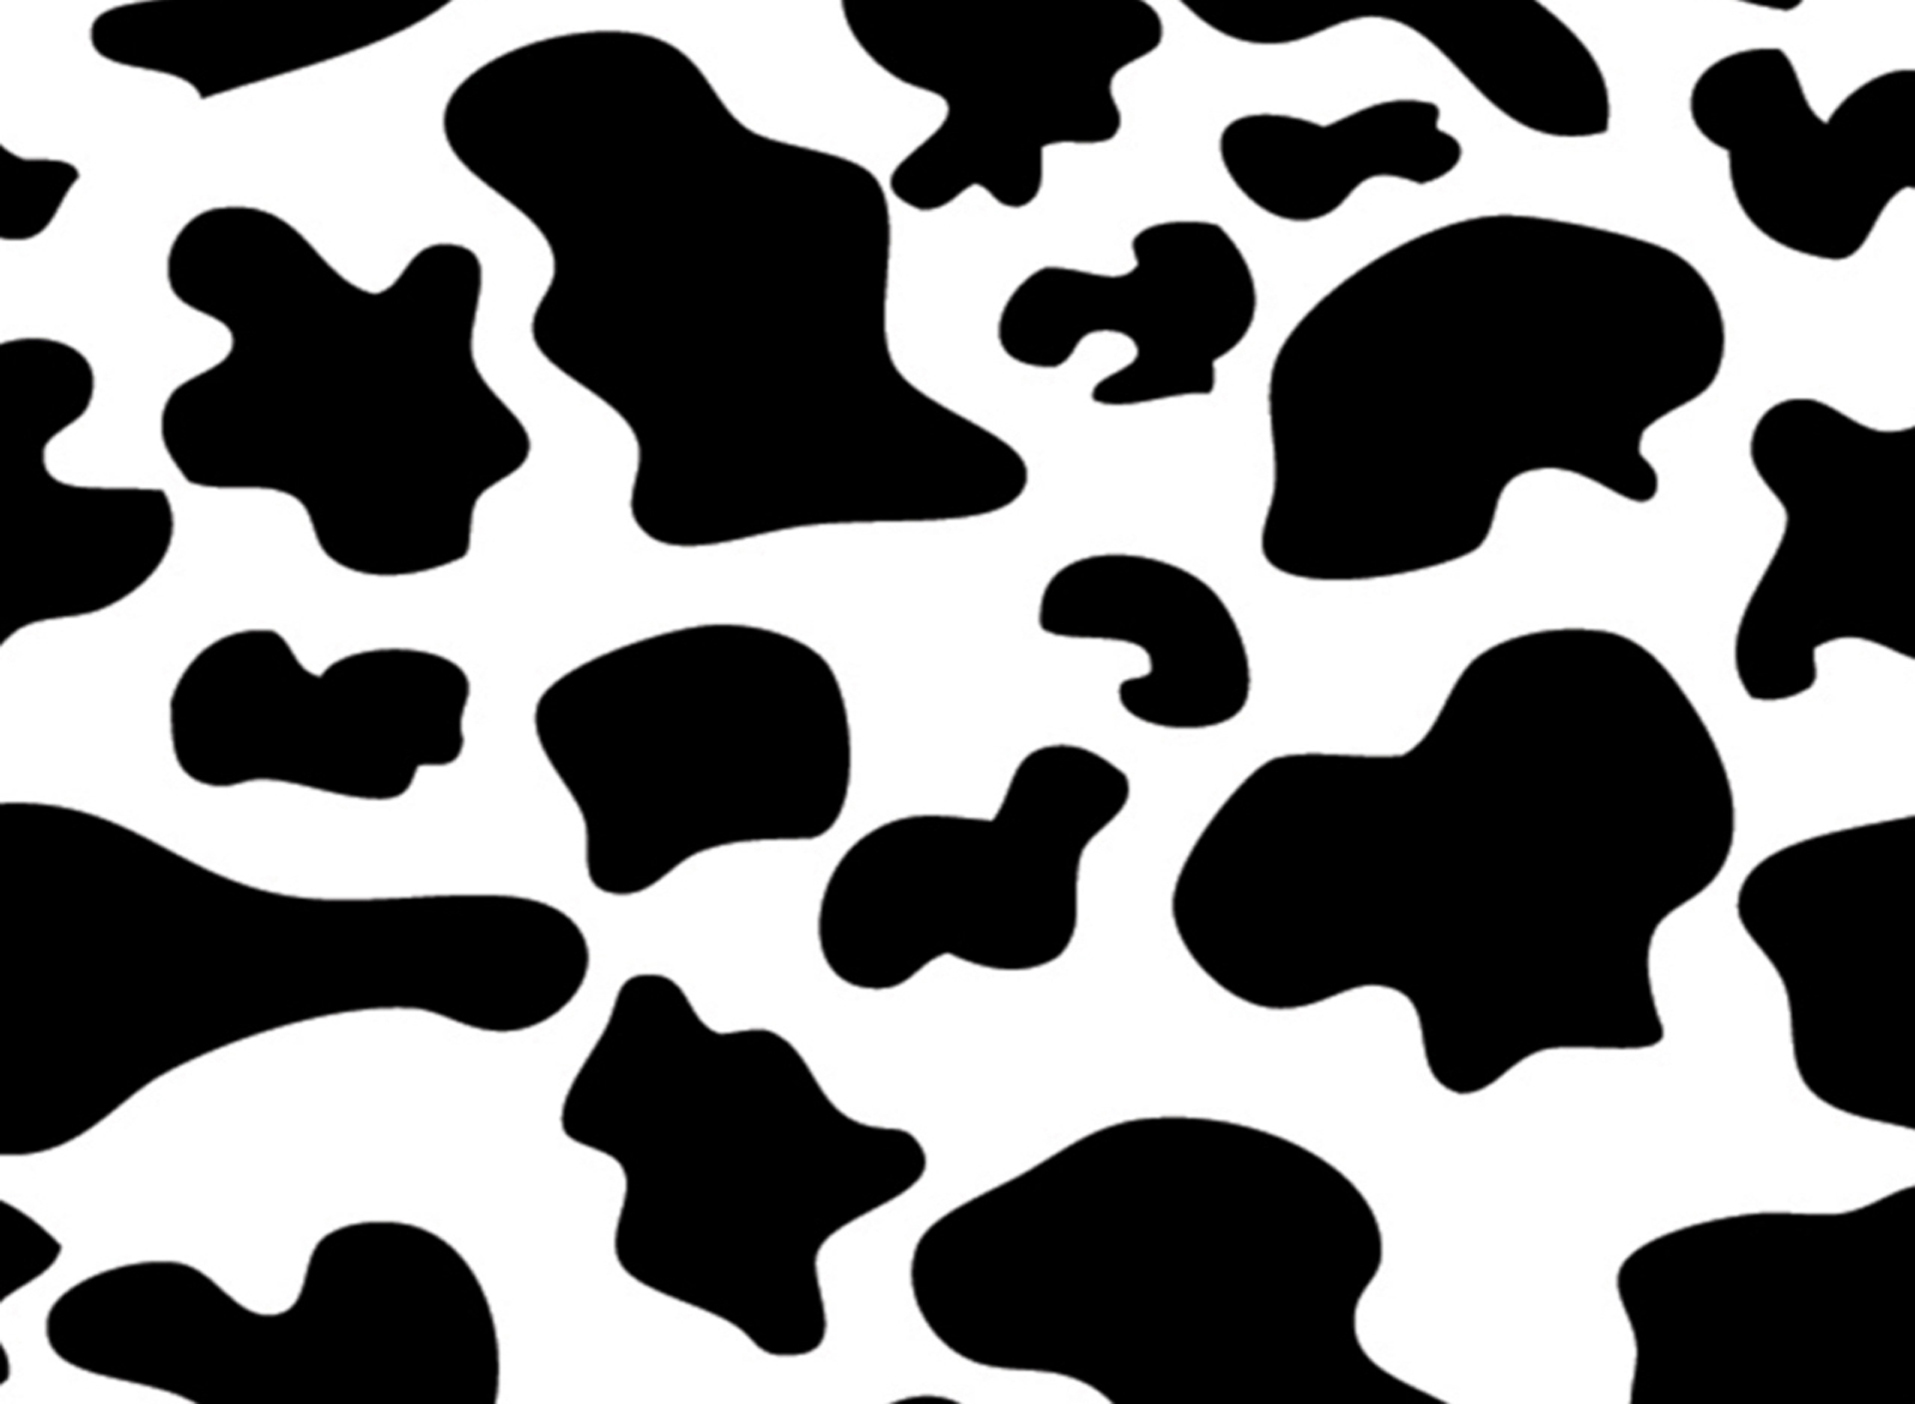 100+] Brown Cow Print Wallpapers